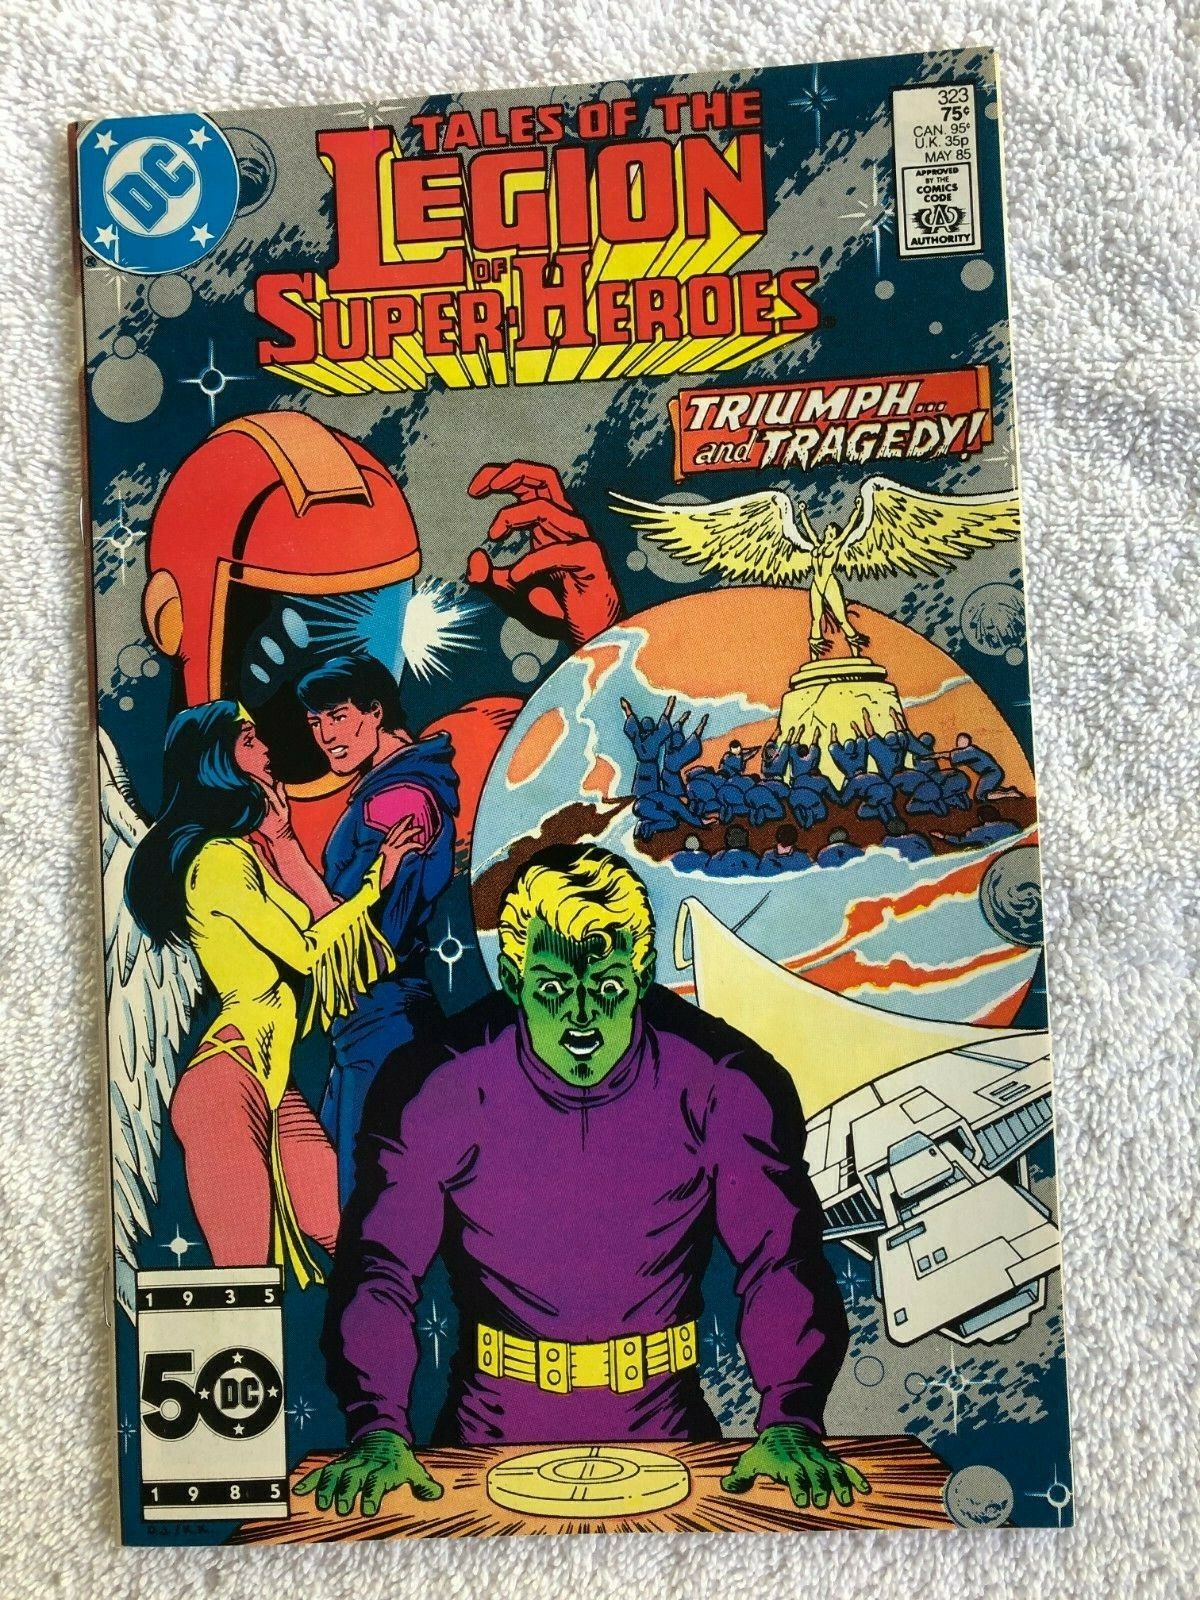 *Tales of the Legion #323 (May 1985, DC) VF+ 8.5